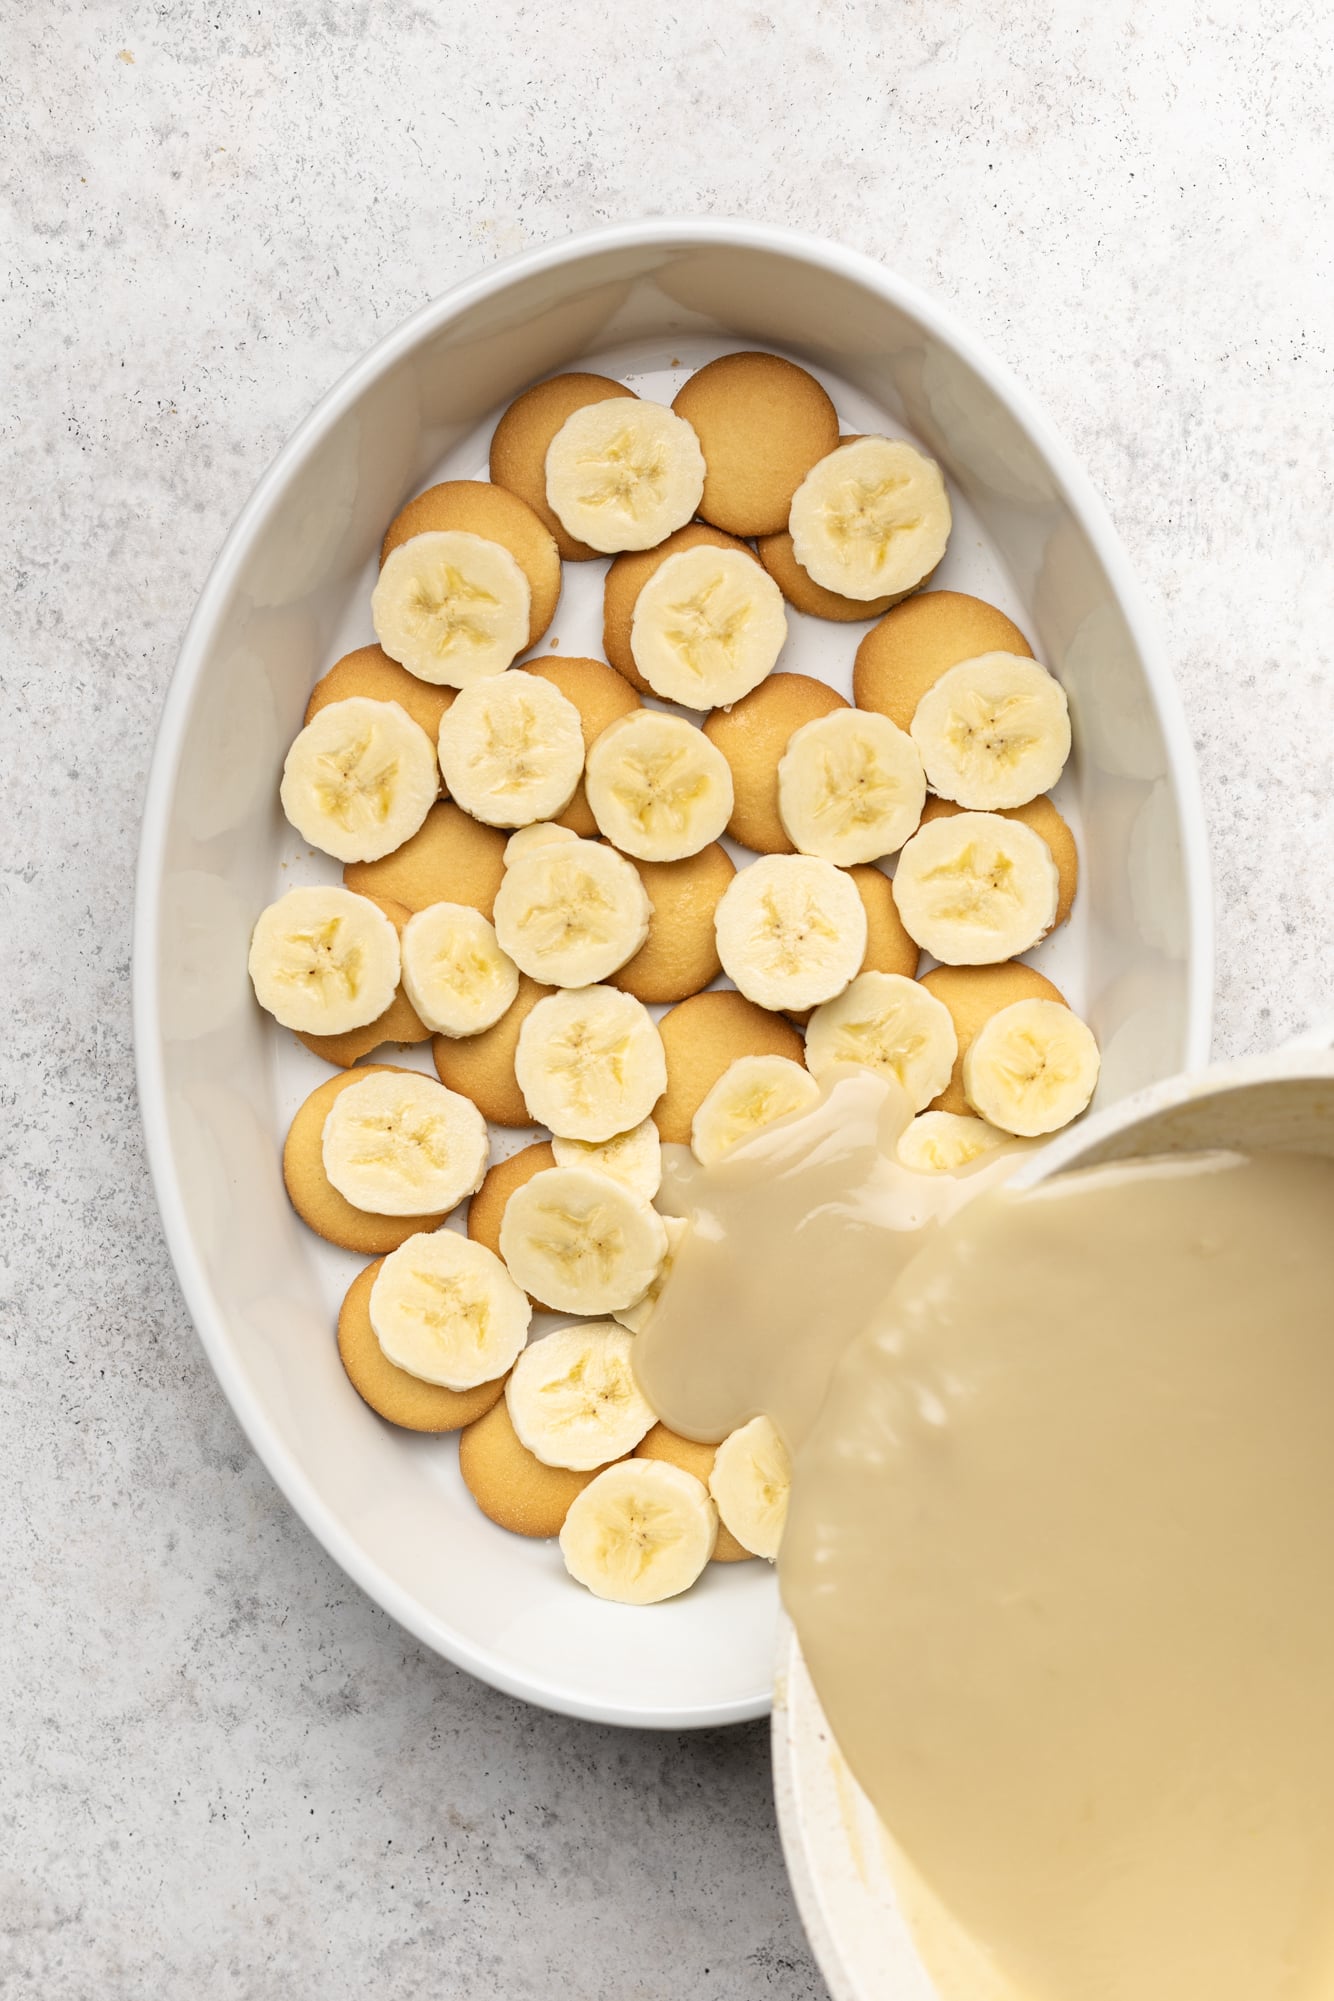 pouring vegan vanilla pudding over layers of vanilla cookies and banana slices in a large white dish.